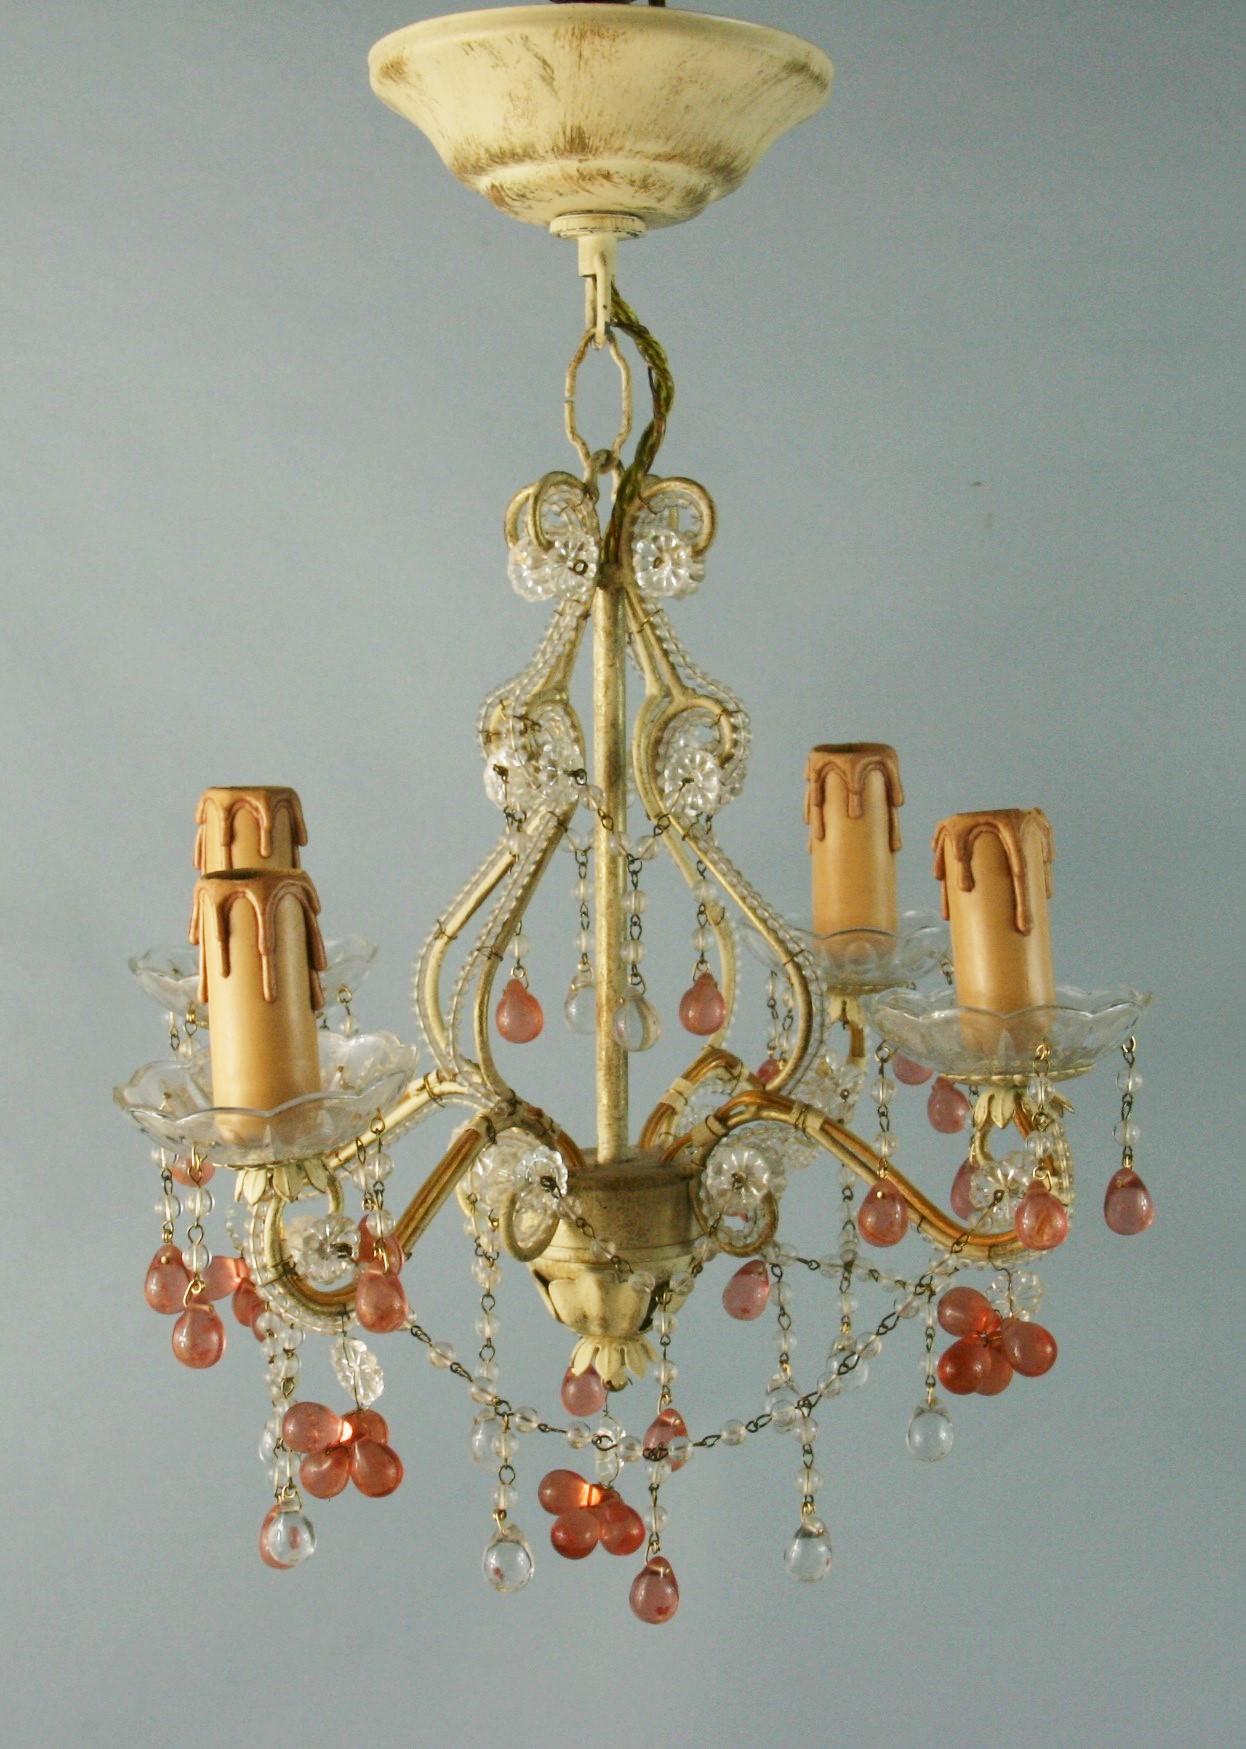 3-816 Italian small beaded glass 4 light chandelier with rose grape drops.